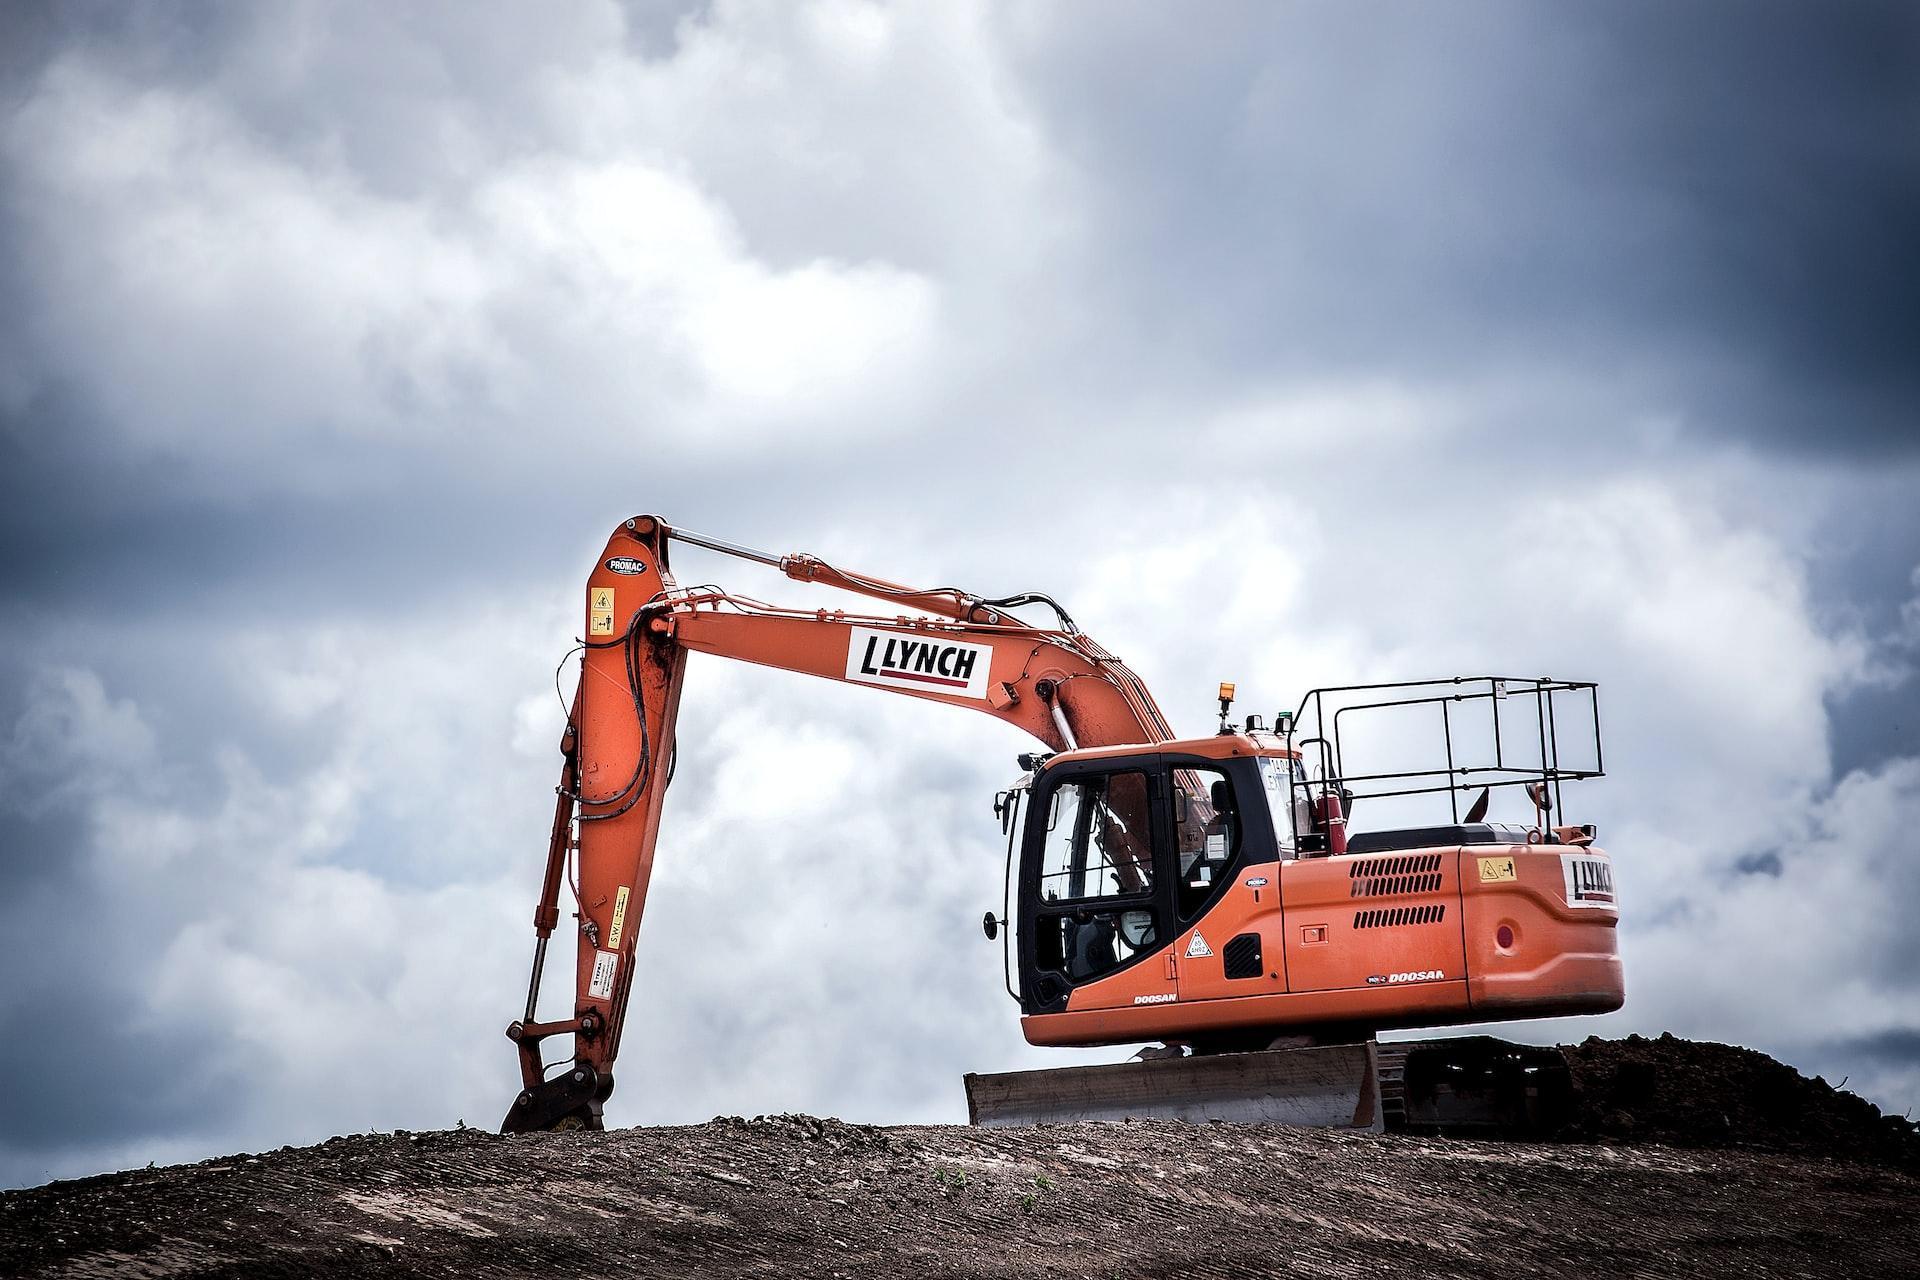 Construction Equipment Business Needs To Succeed